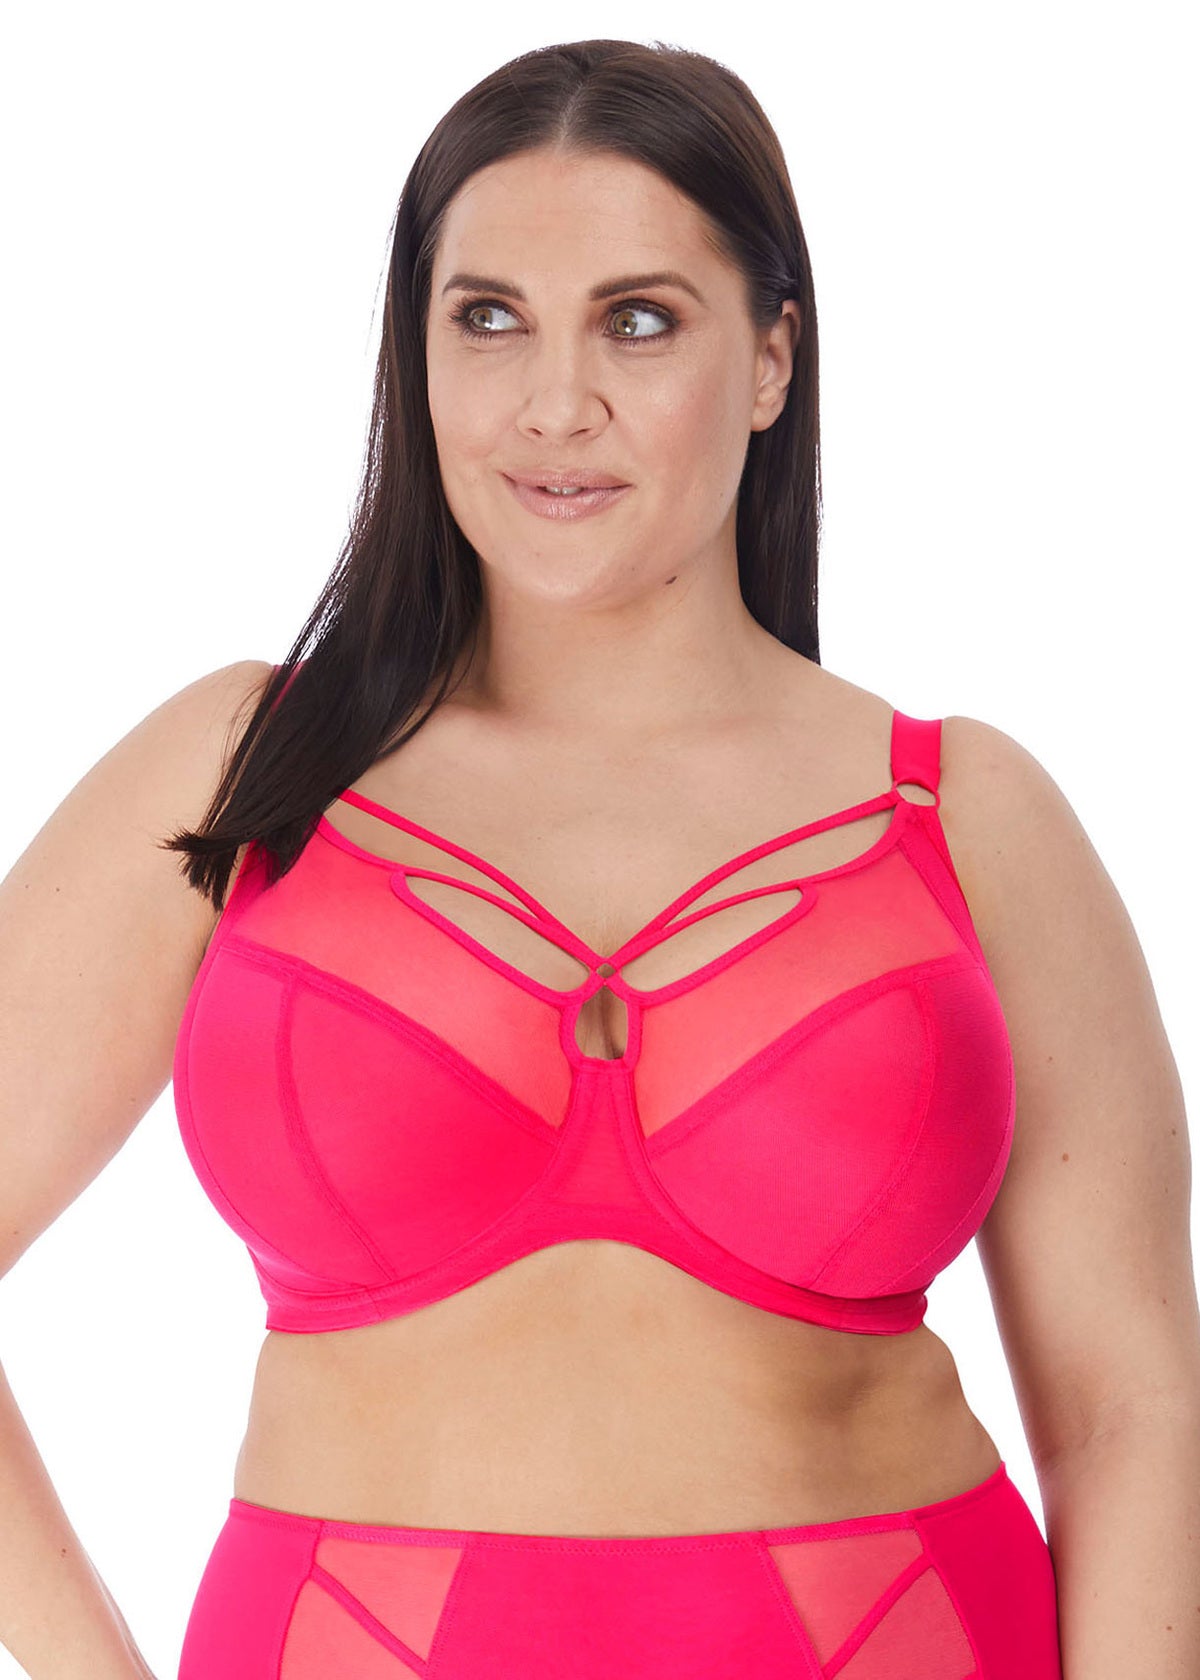 B.wow'd Wirefree Rose Smoke – Rubenesque Lingerie